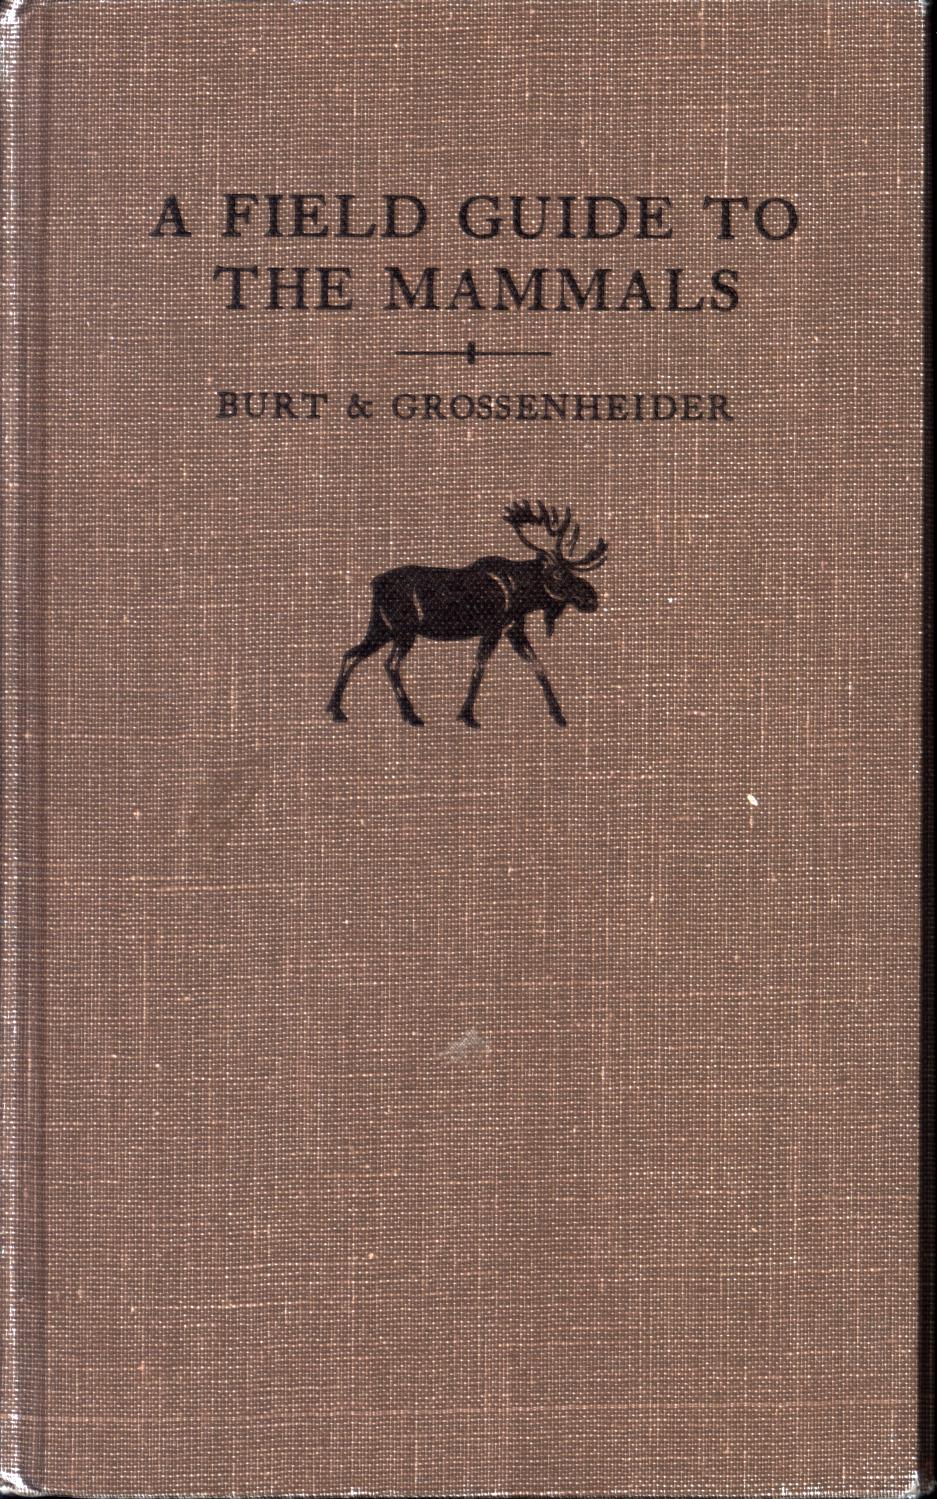 FIELD GUIDE TO THE MAMMALS: giving field marks of all species north of Mexico. 